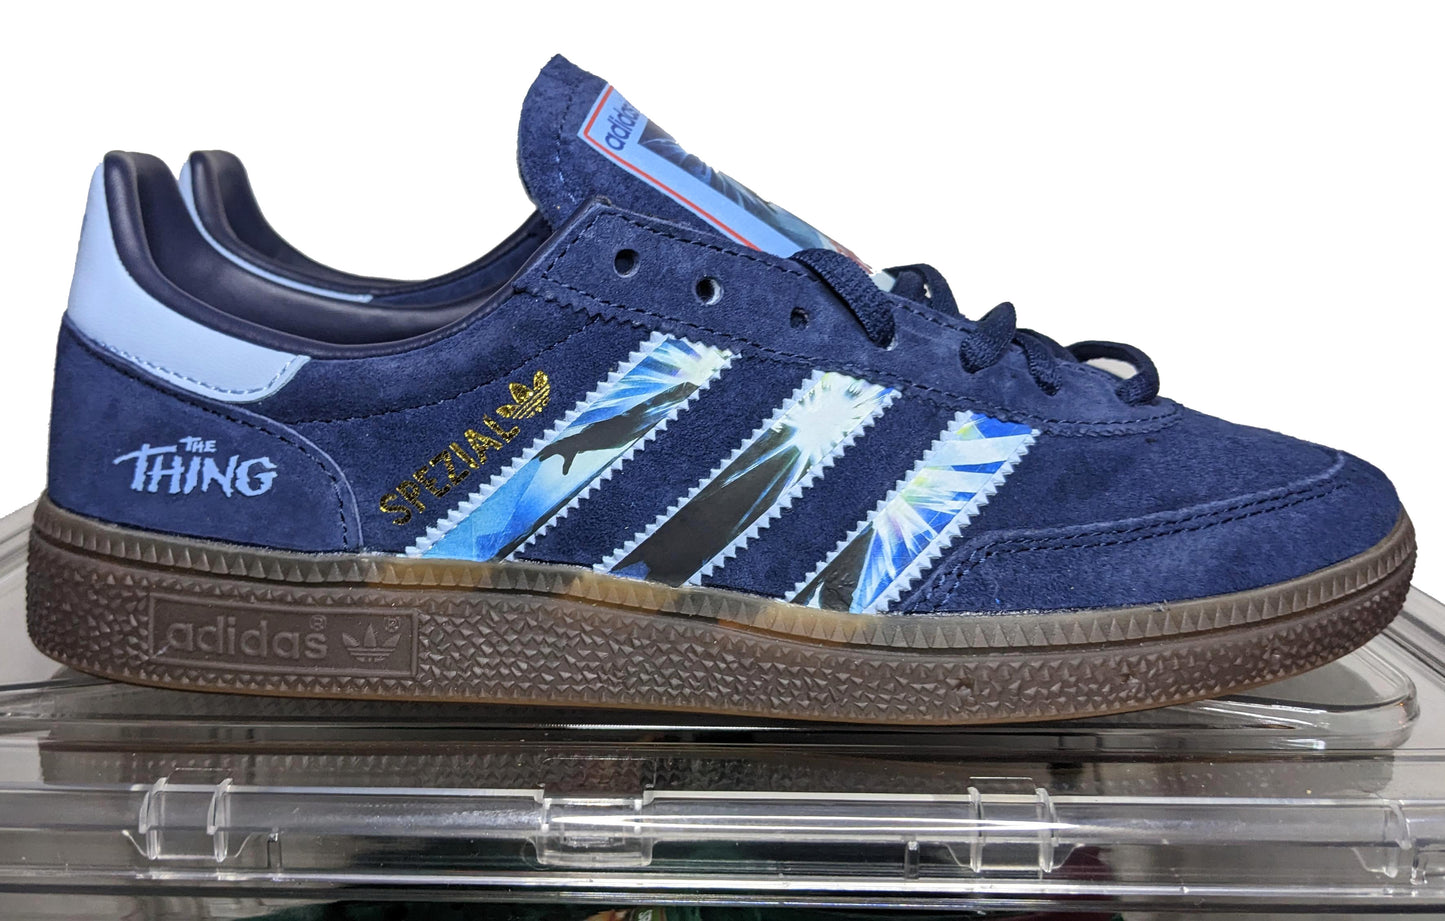 Limited edition John Carpenters The Thing movie inspired navy blue /sky blue Adidas custom Handball Spezial trainers / sneakers